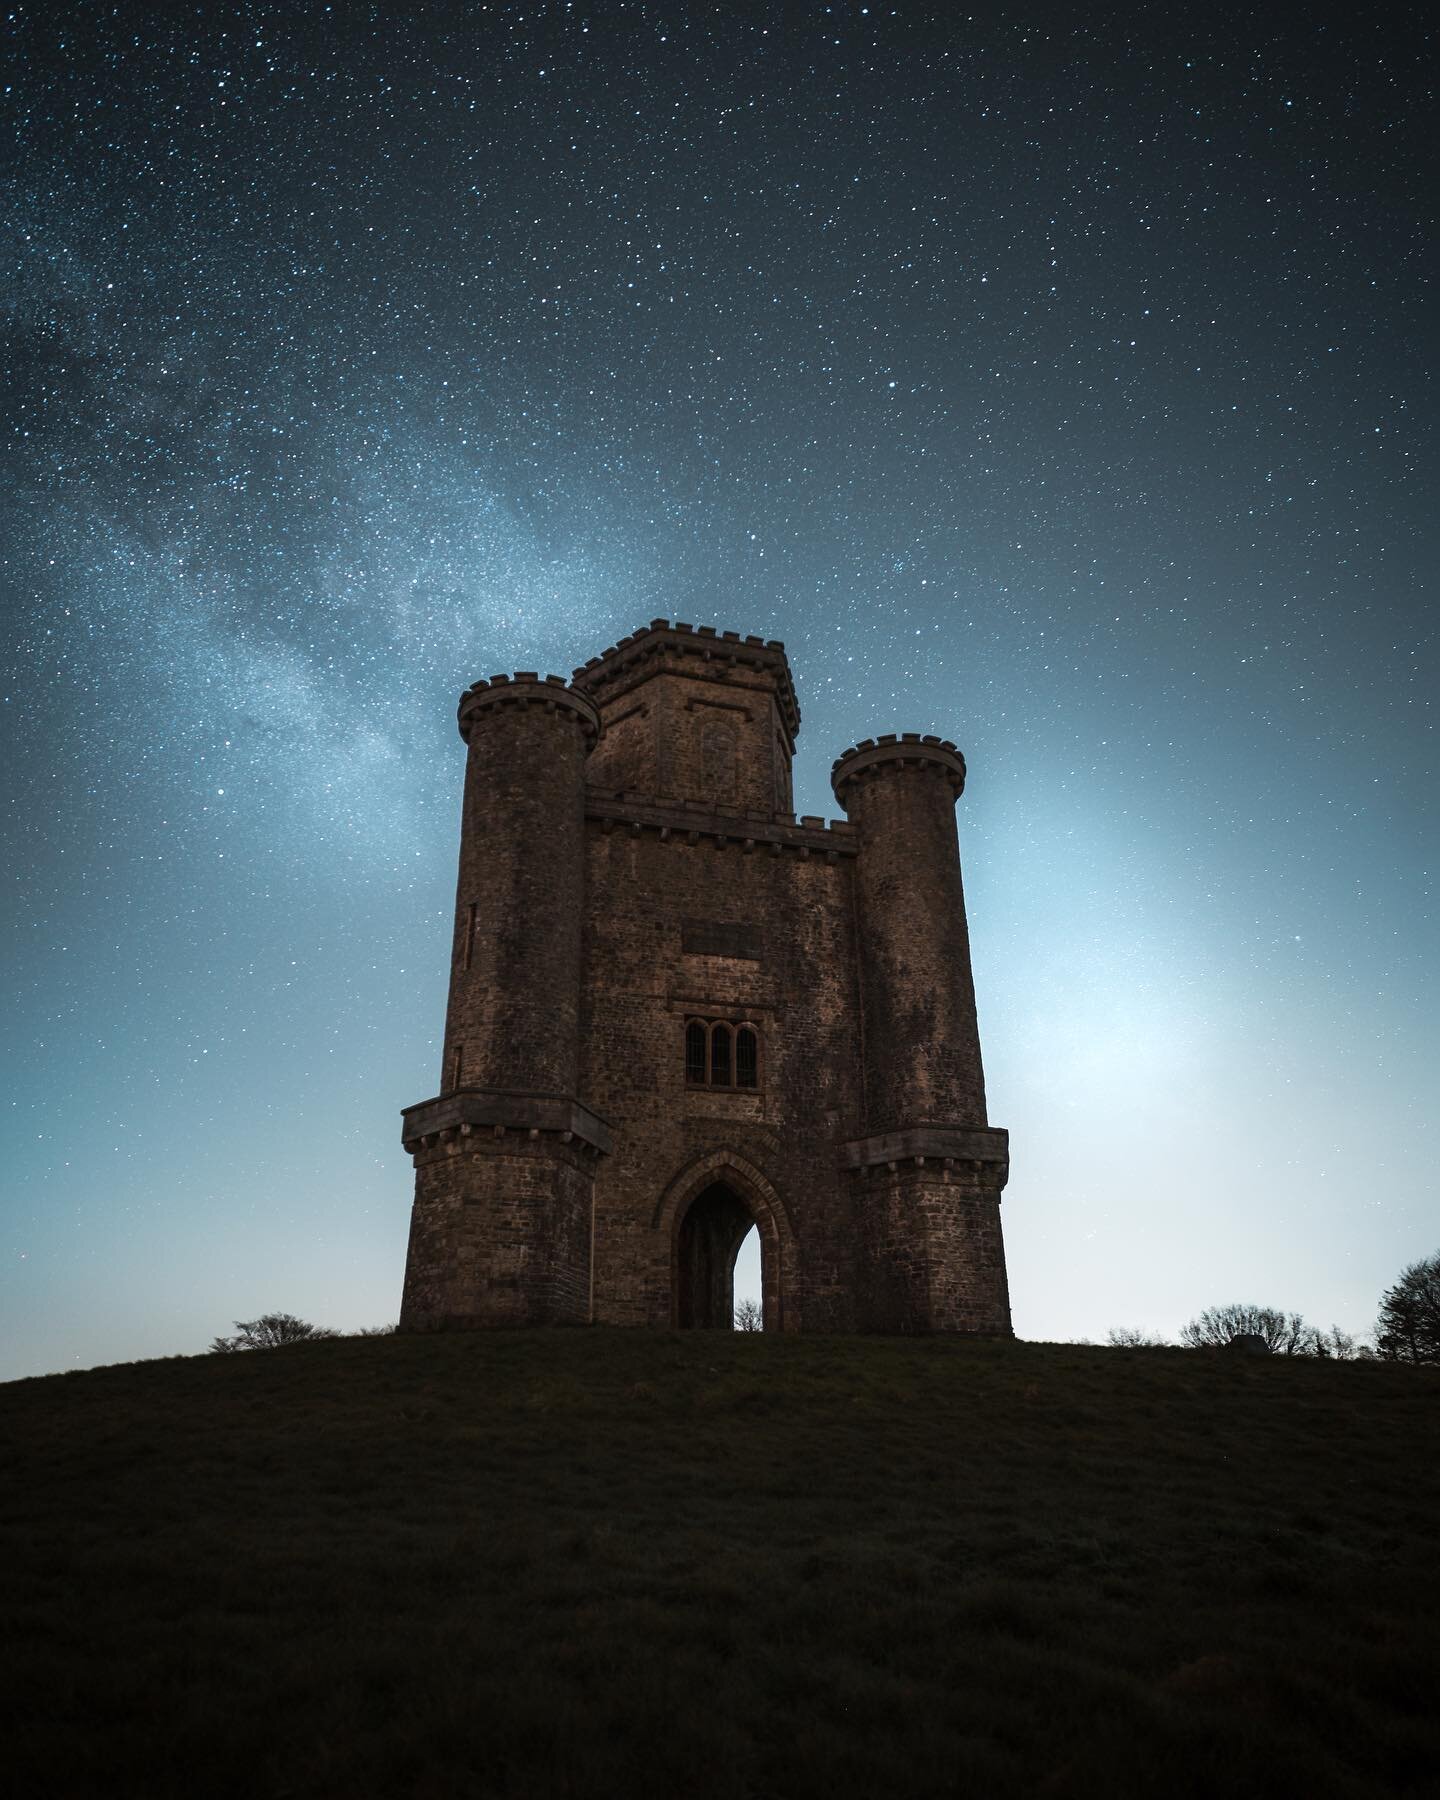 I headed to Paxtons tower on the weekend for my first time out for astrophotography in what feels like an age. I&rsquo;m definitely rusty and I don&rsquo;t think it was a particularly successful outing but I came away with at least 1 image I think is